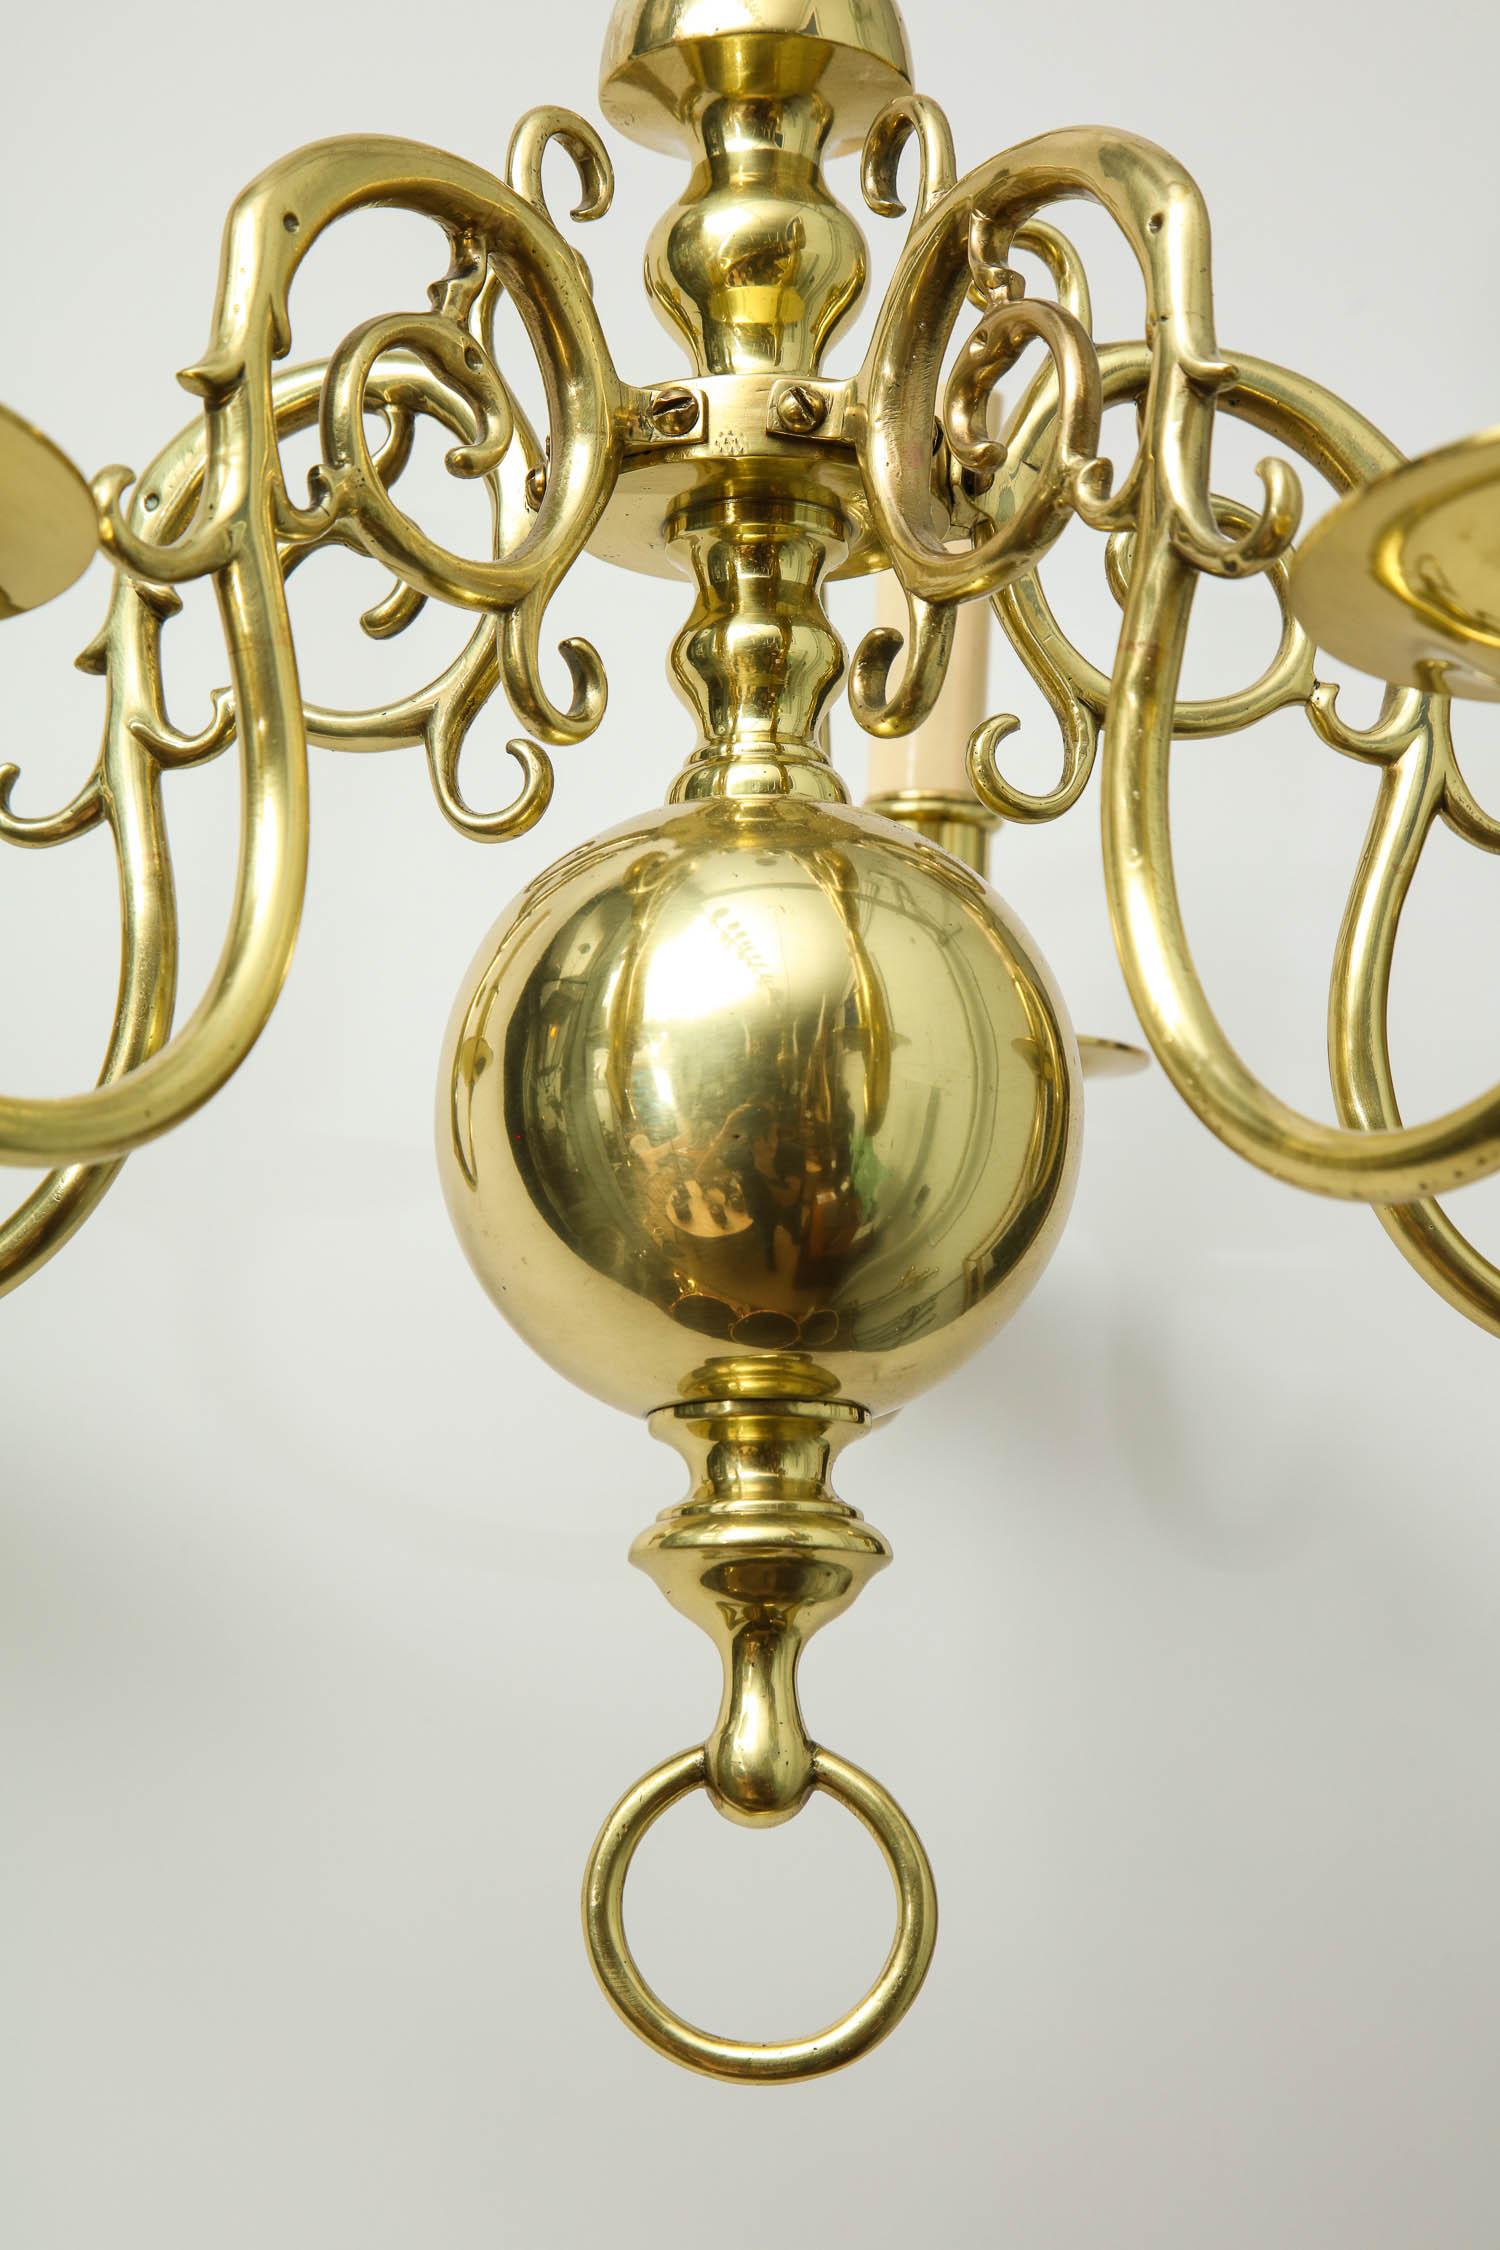 1930s Brass Chandelier In Excellent Condition For Sale In Greenwich, CT